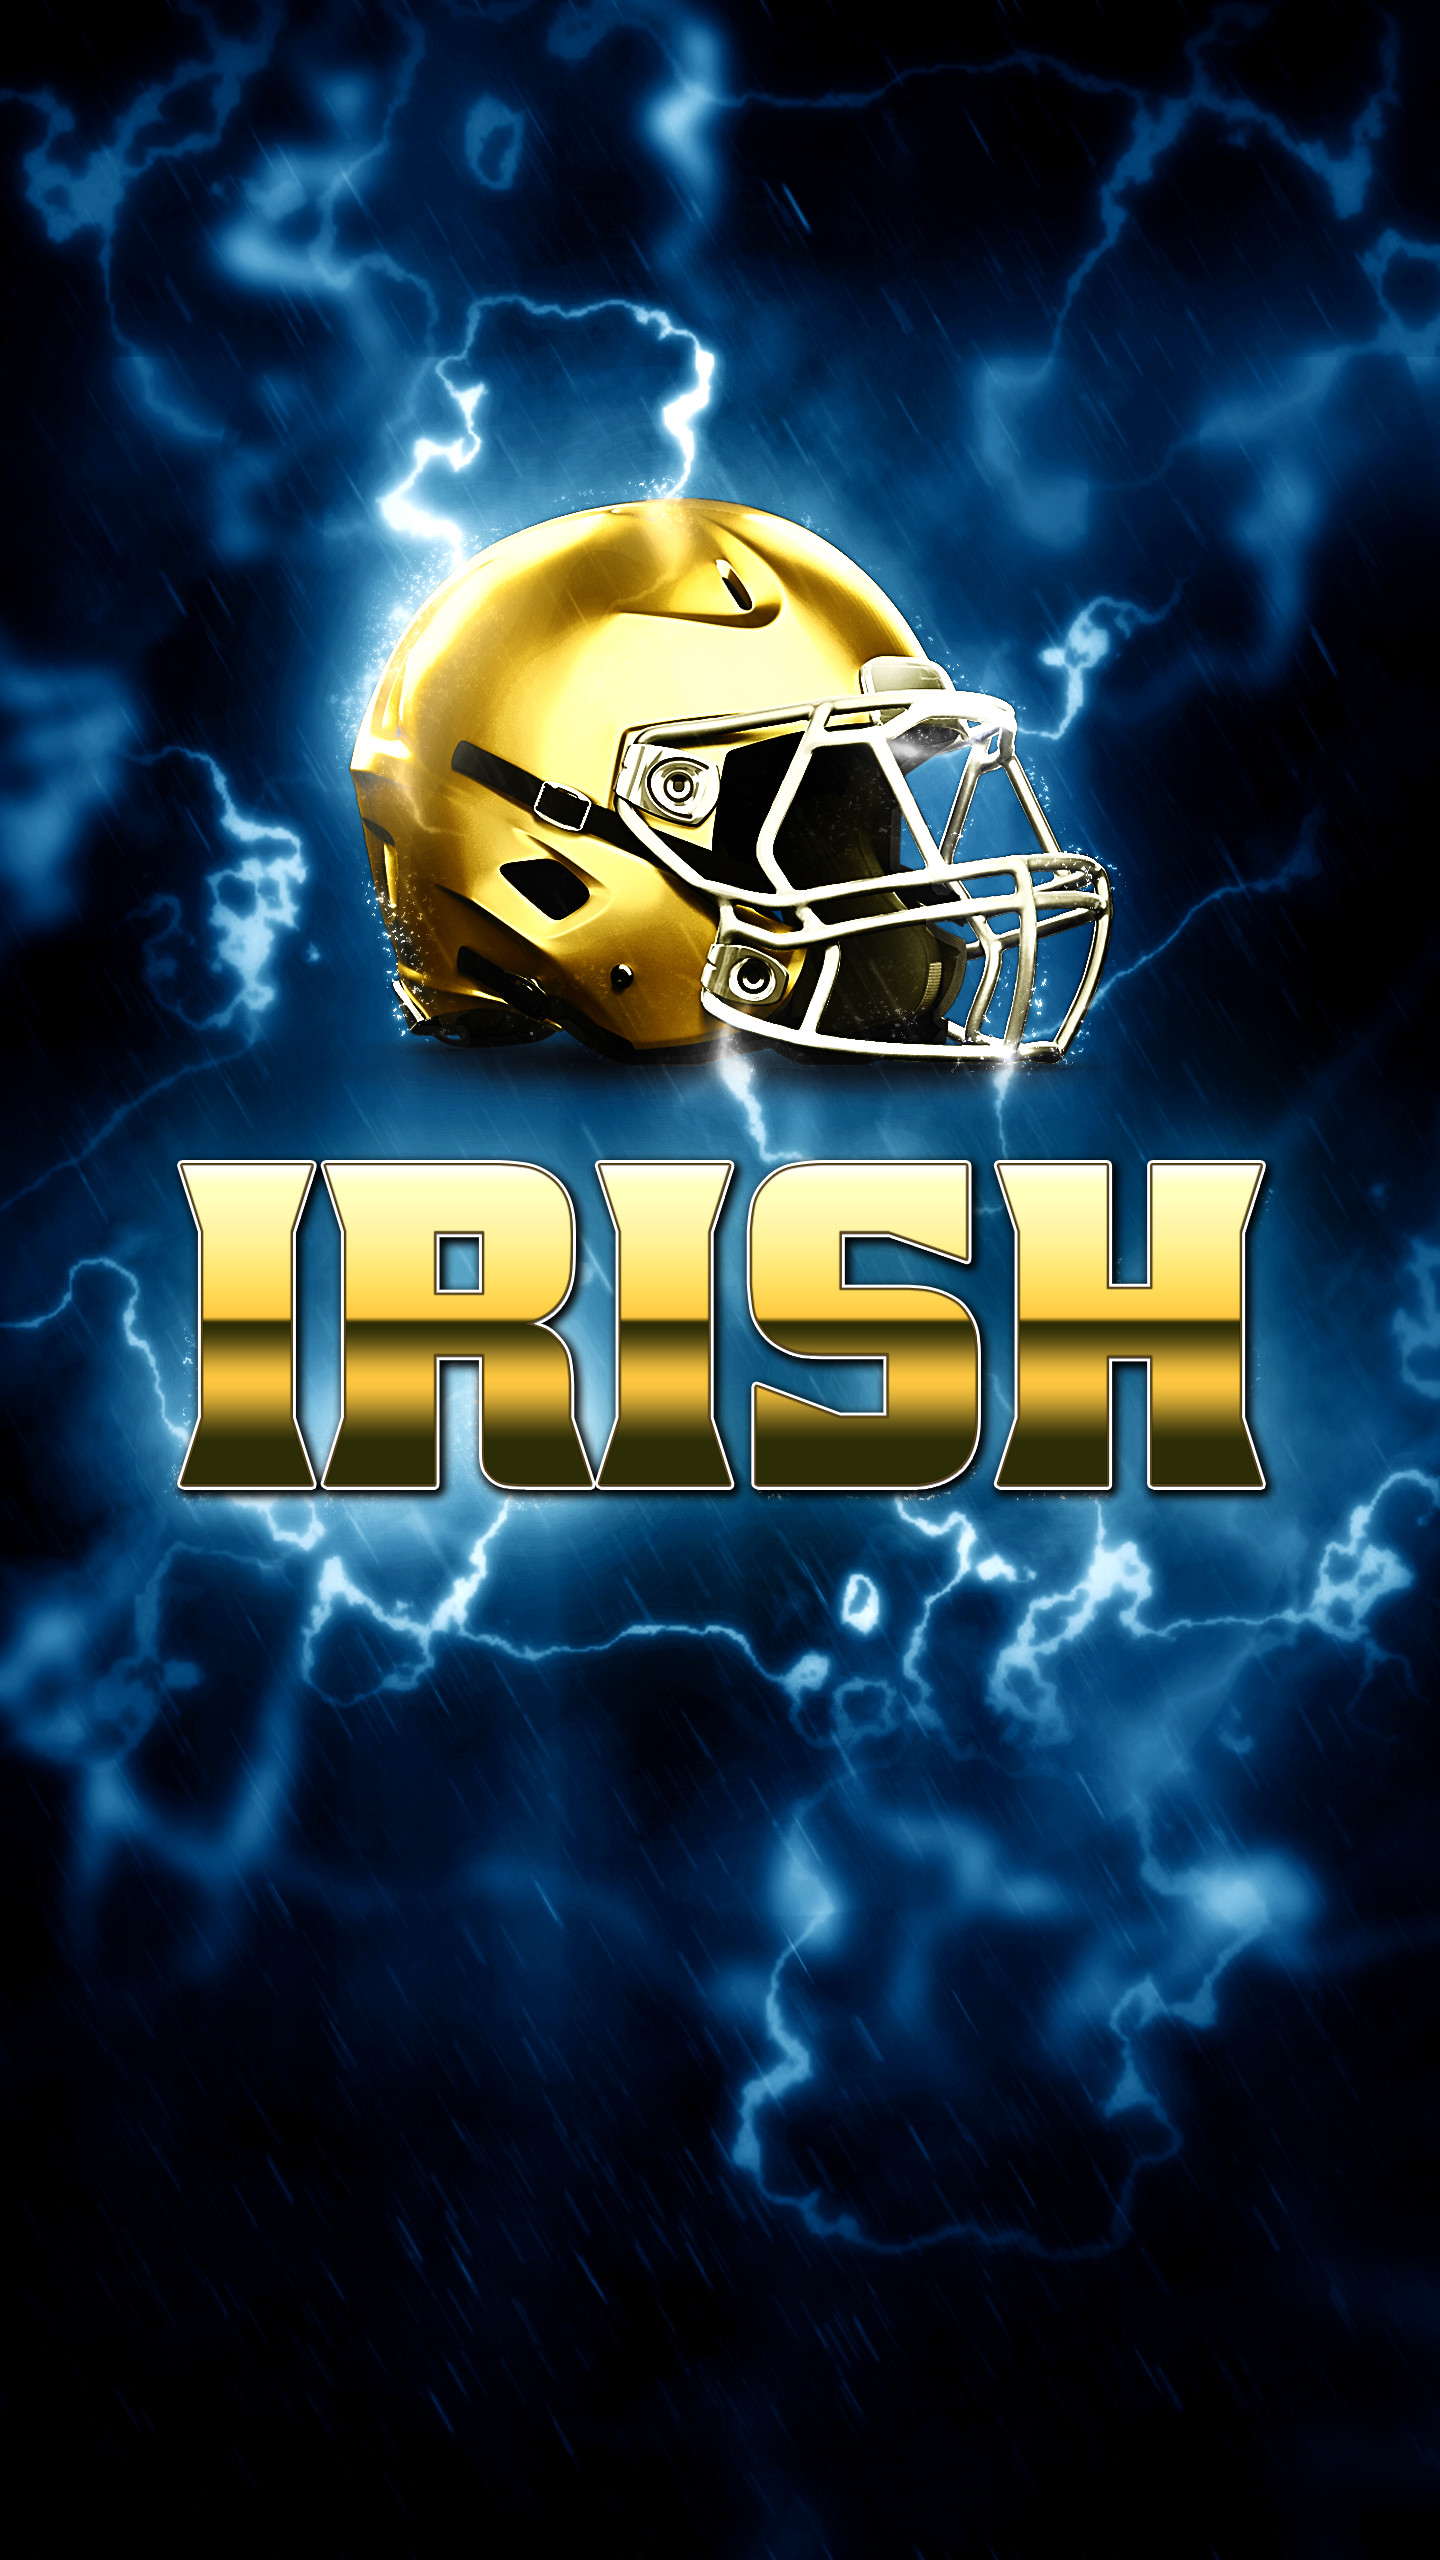 1440x2560 Notre Dame Wallpaper iPhone/Android Screen Resolution (1440 x 2560)